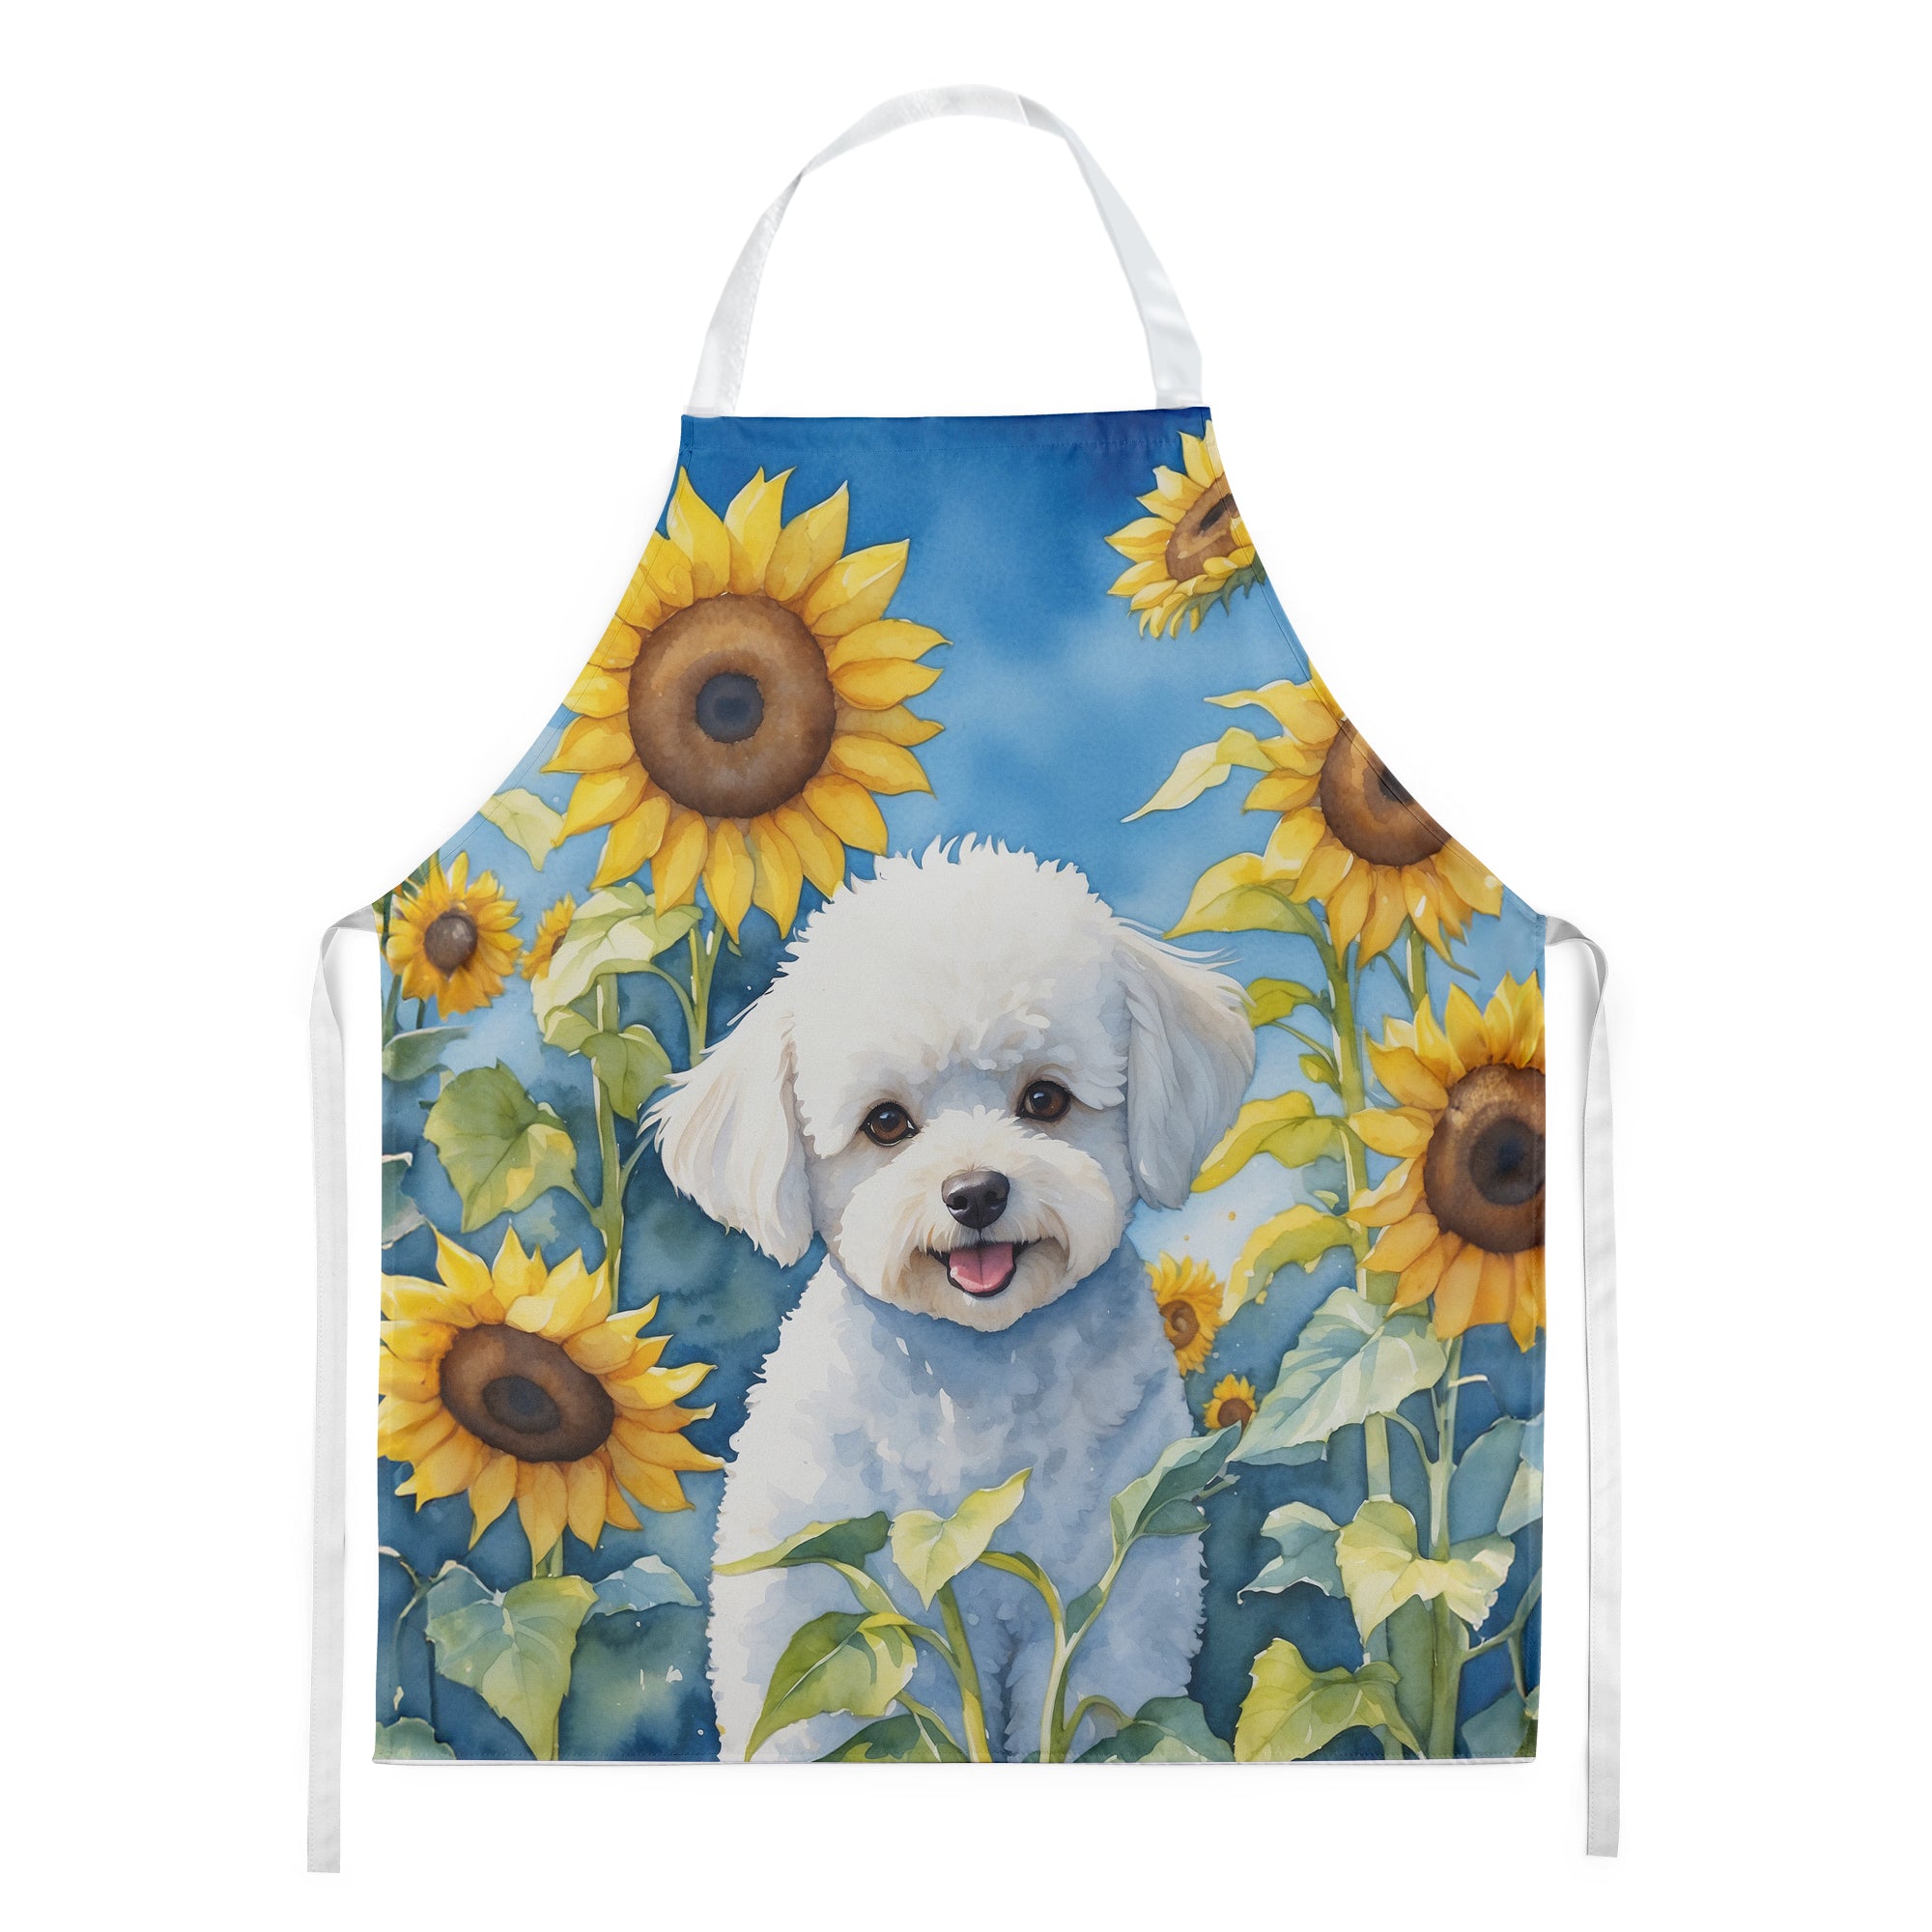 Buy this Bichon Frise in Sunflowers Apron